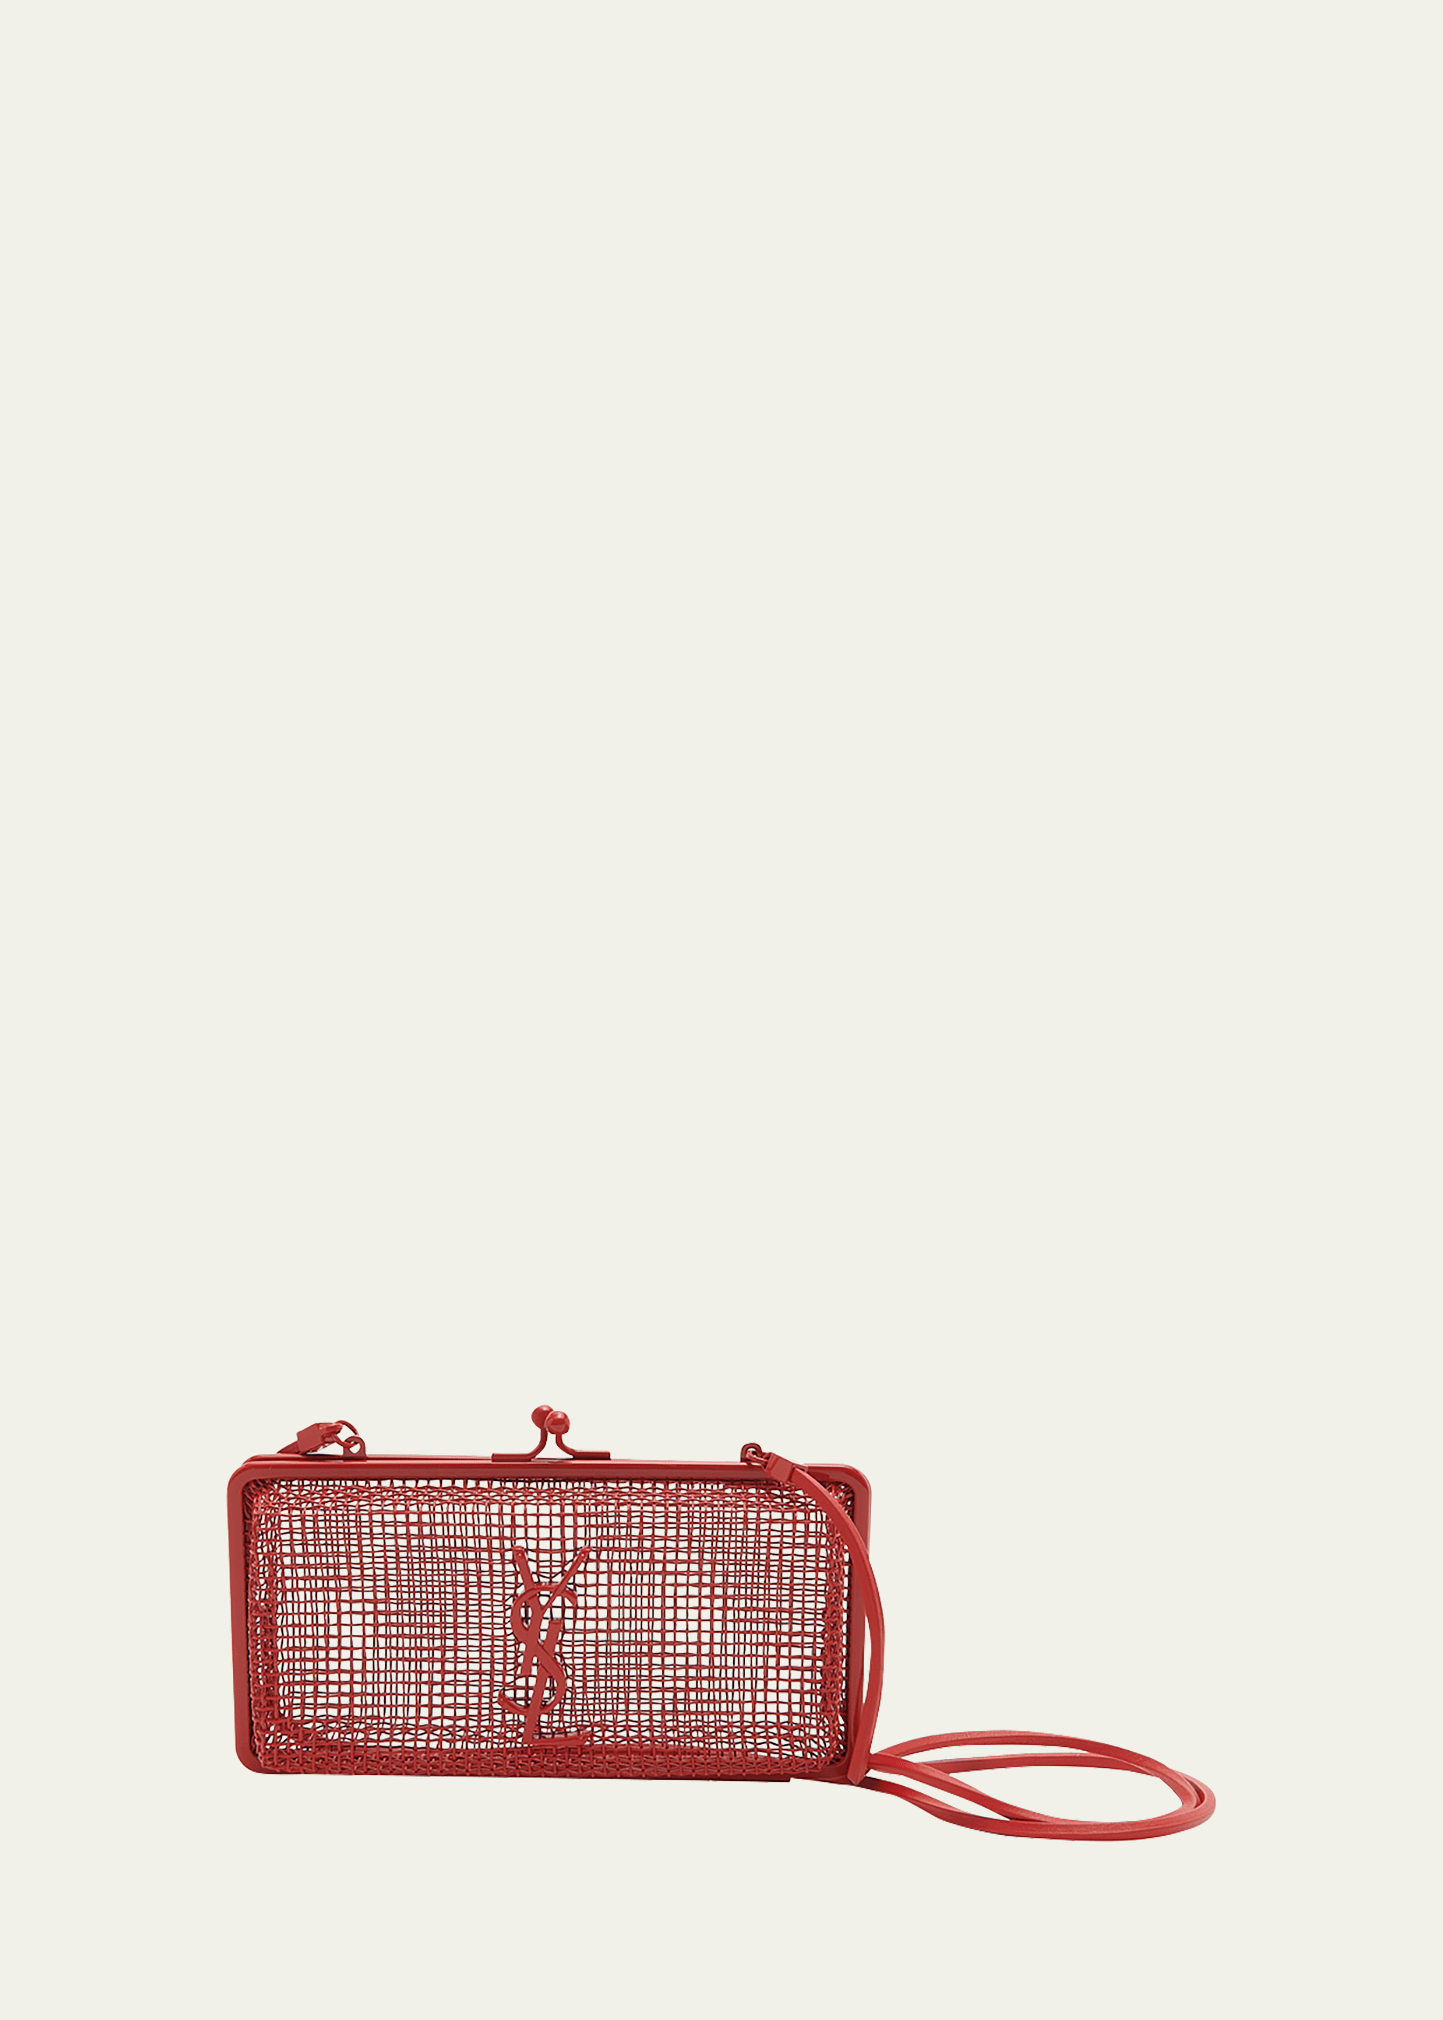 Saint Laurent Ysl Caged Glass Strass Crossbody Bag In Red